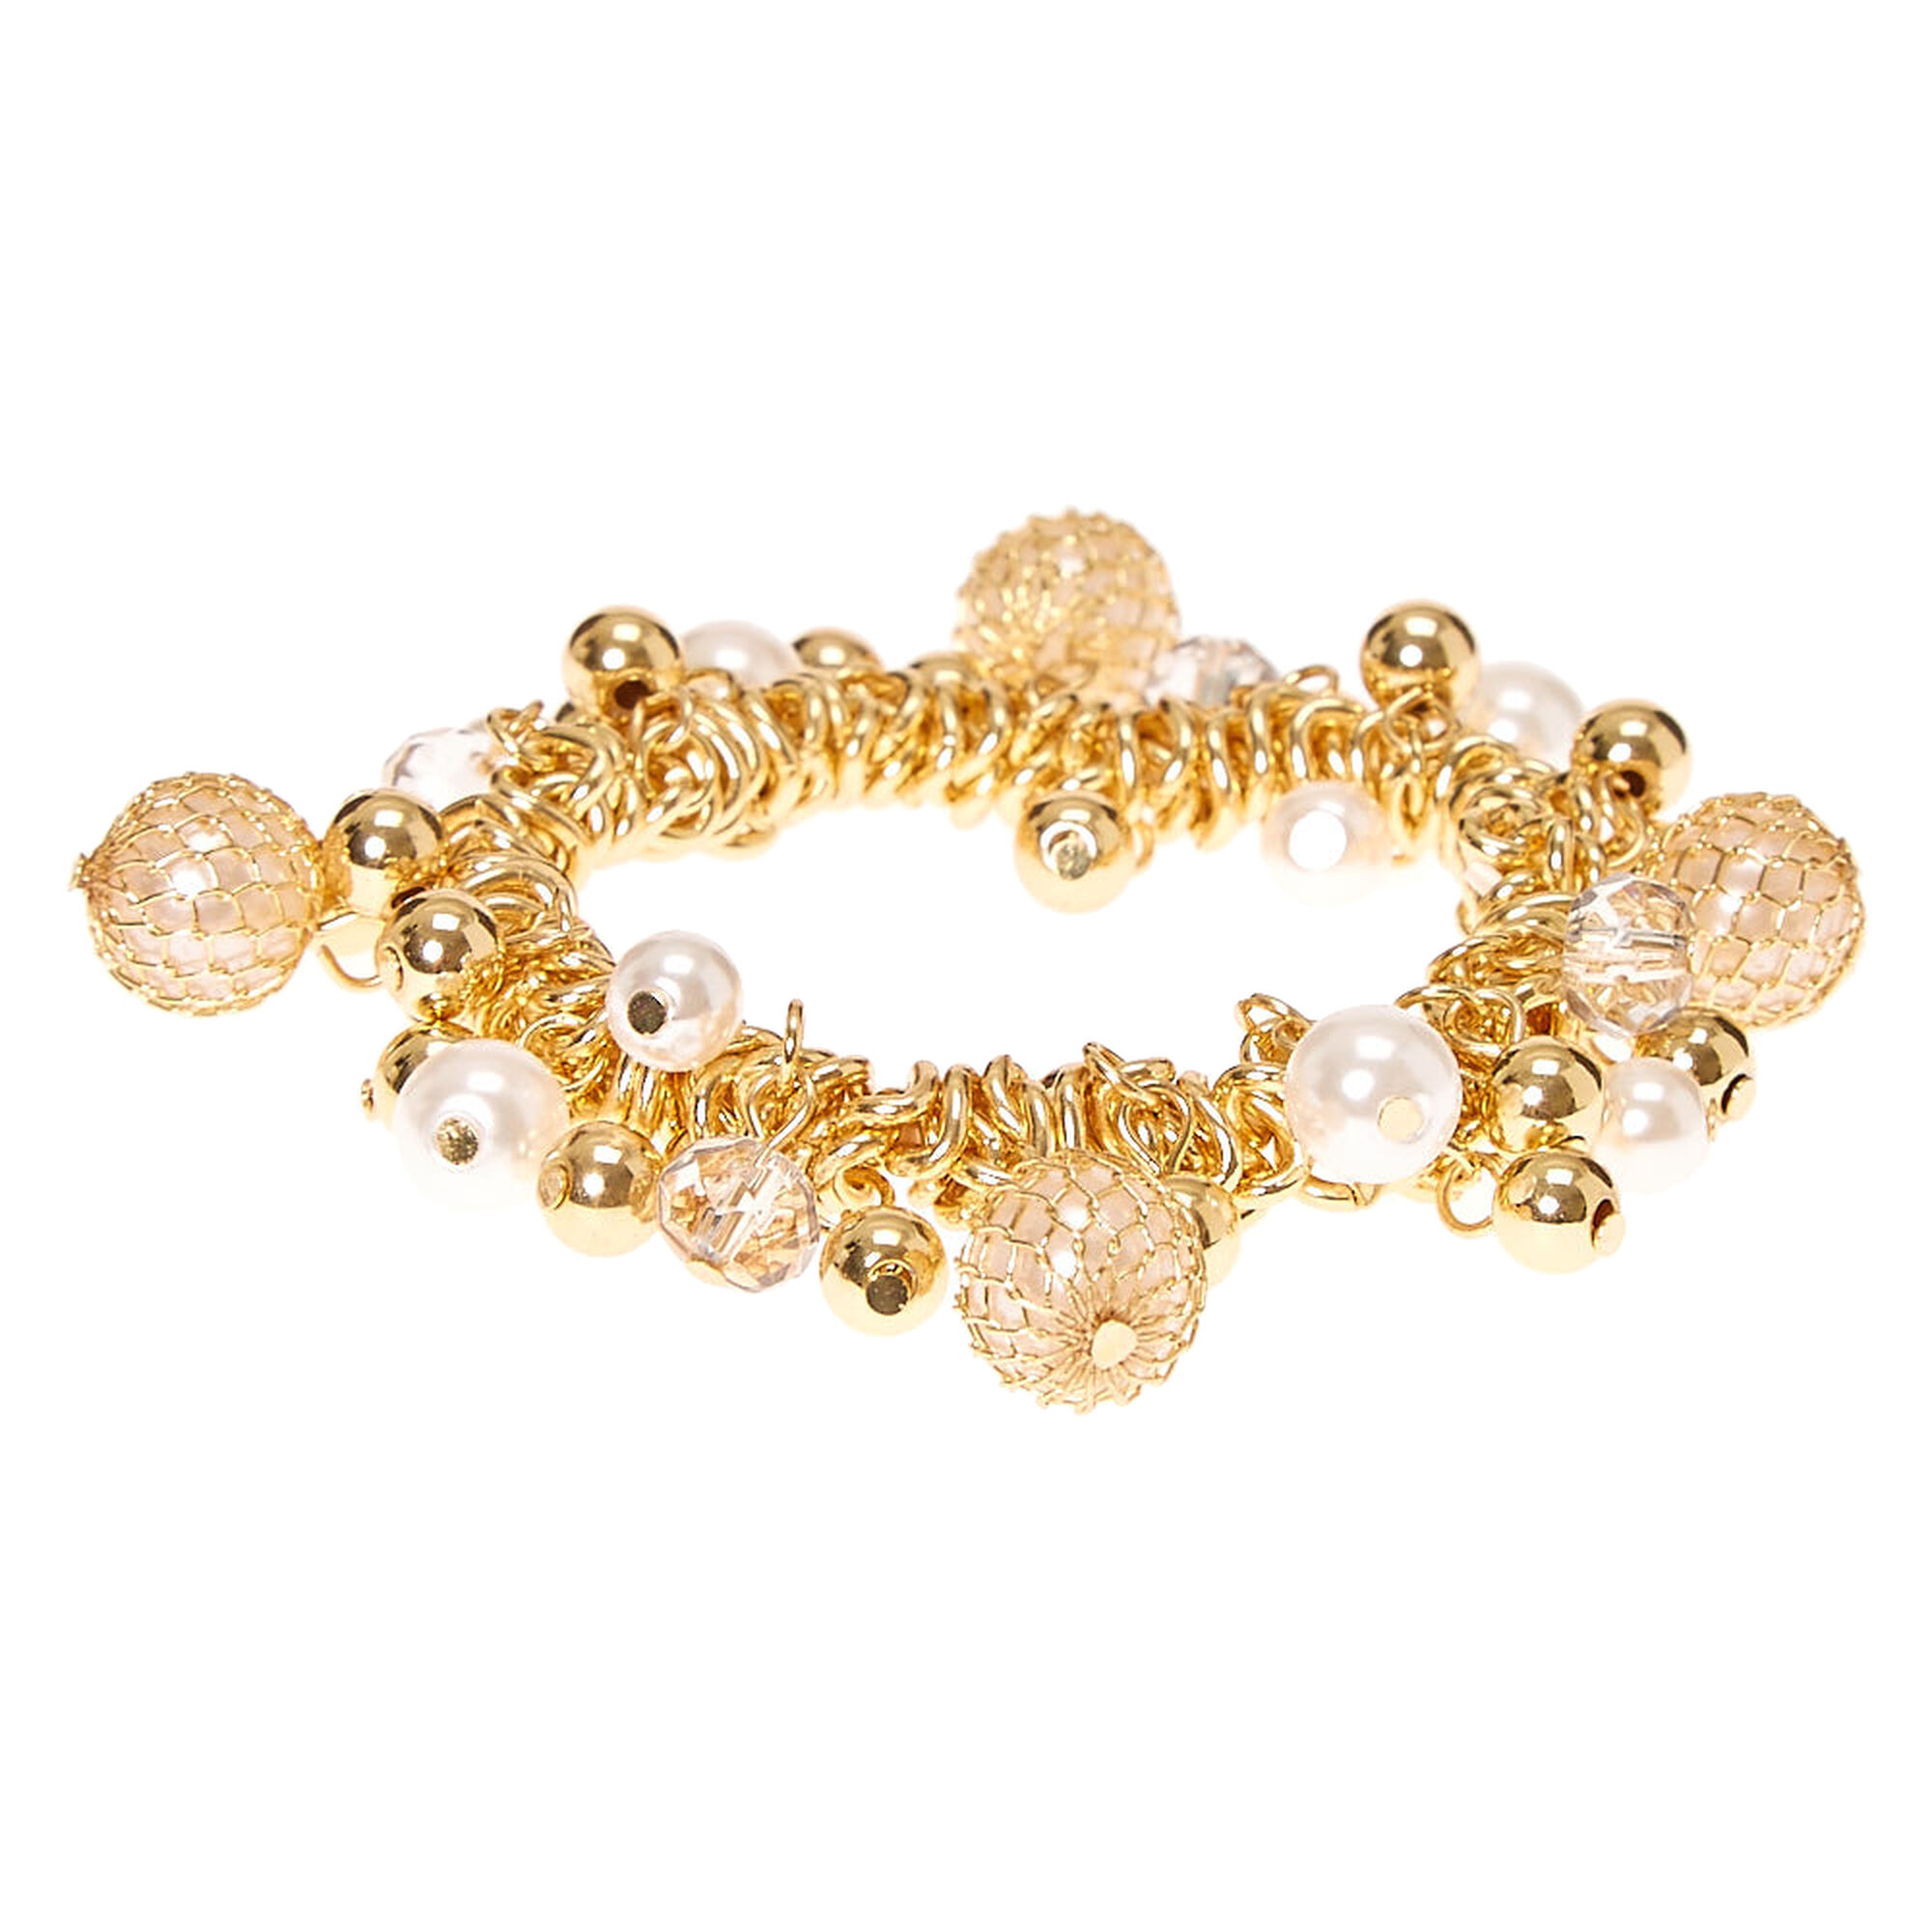 Gold-Tone Pearl & Bead Stretch Bracelet | Icing US